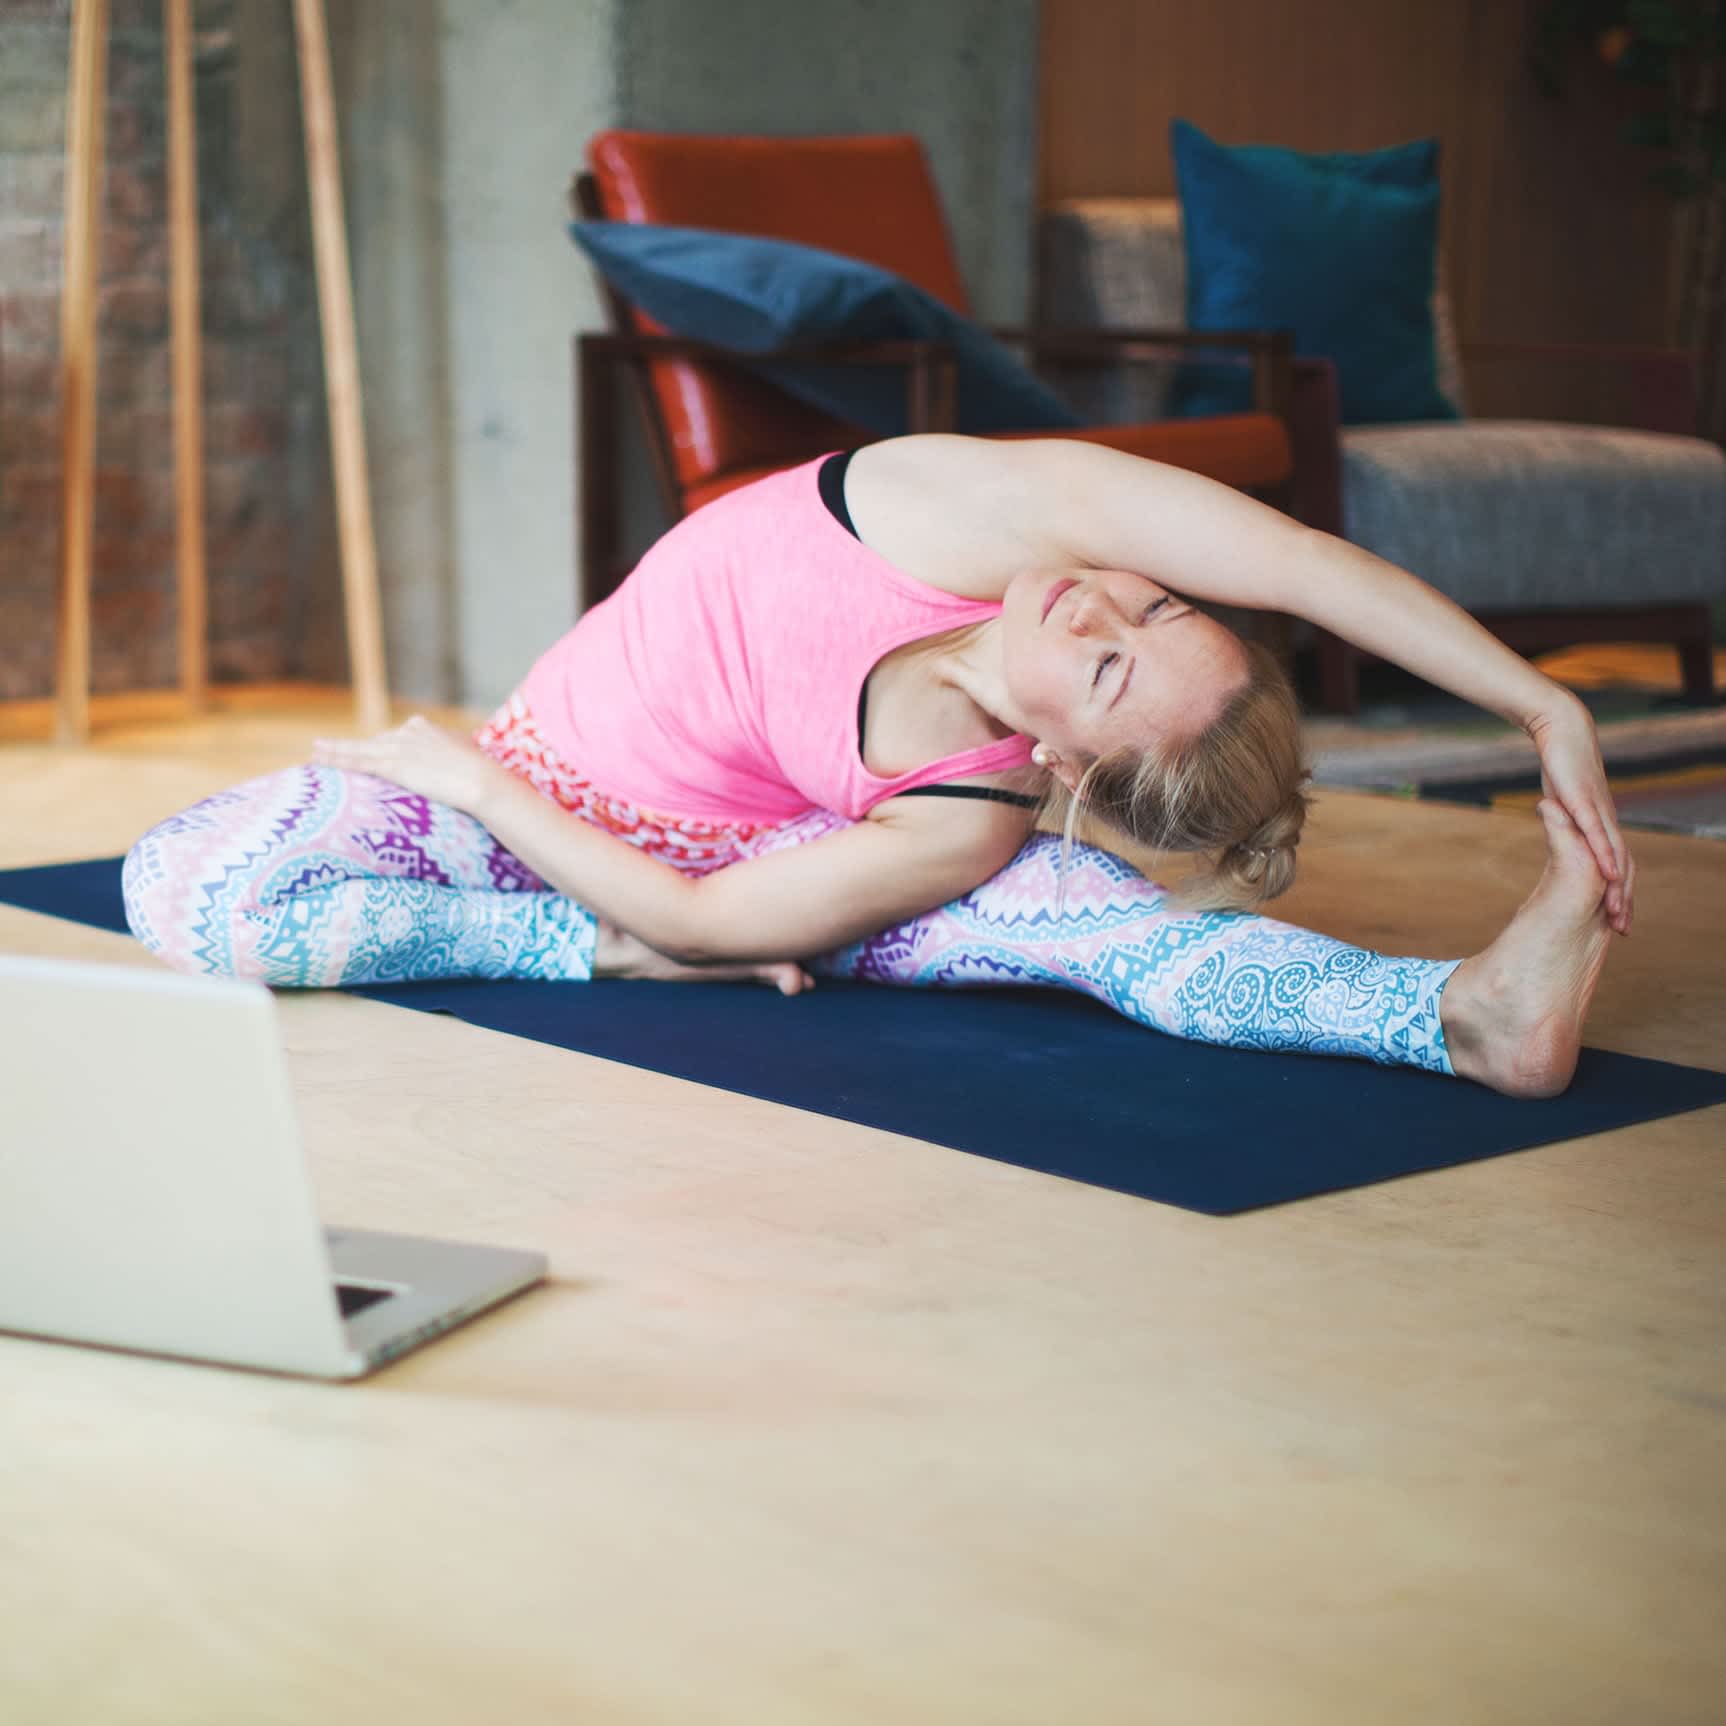 Online yoga classes from beginner to advanced